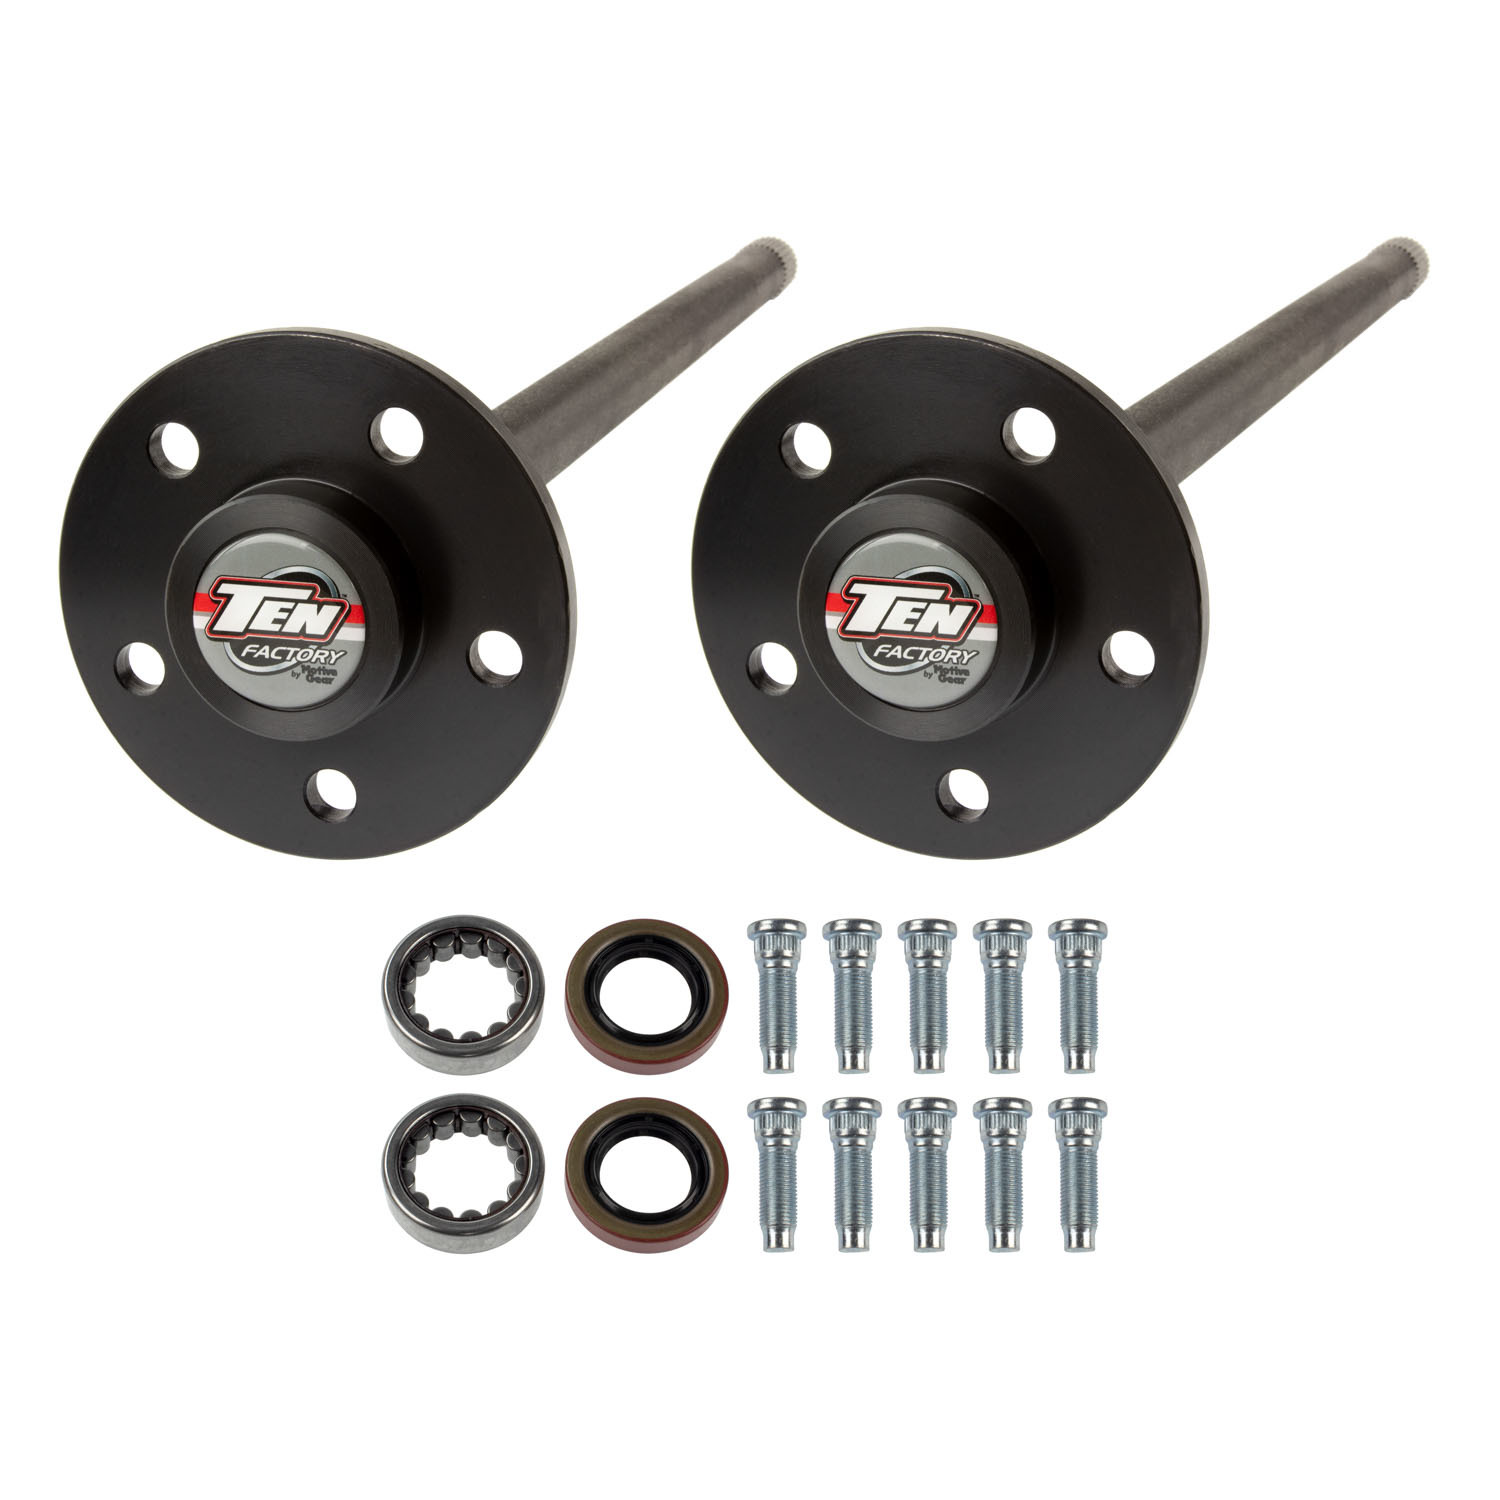 TEN Factory MG22185 Performance Axle Kit Fits 94-98 Mustang